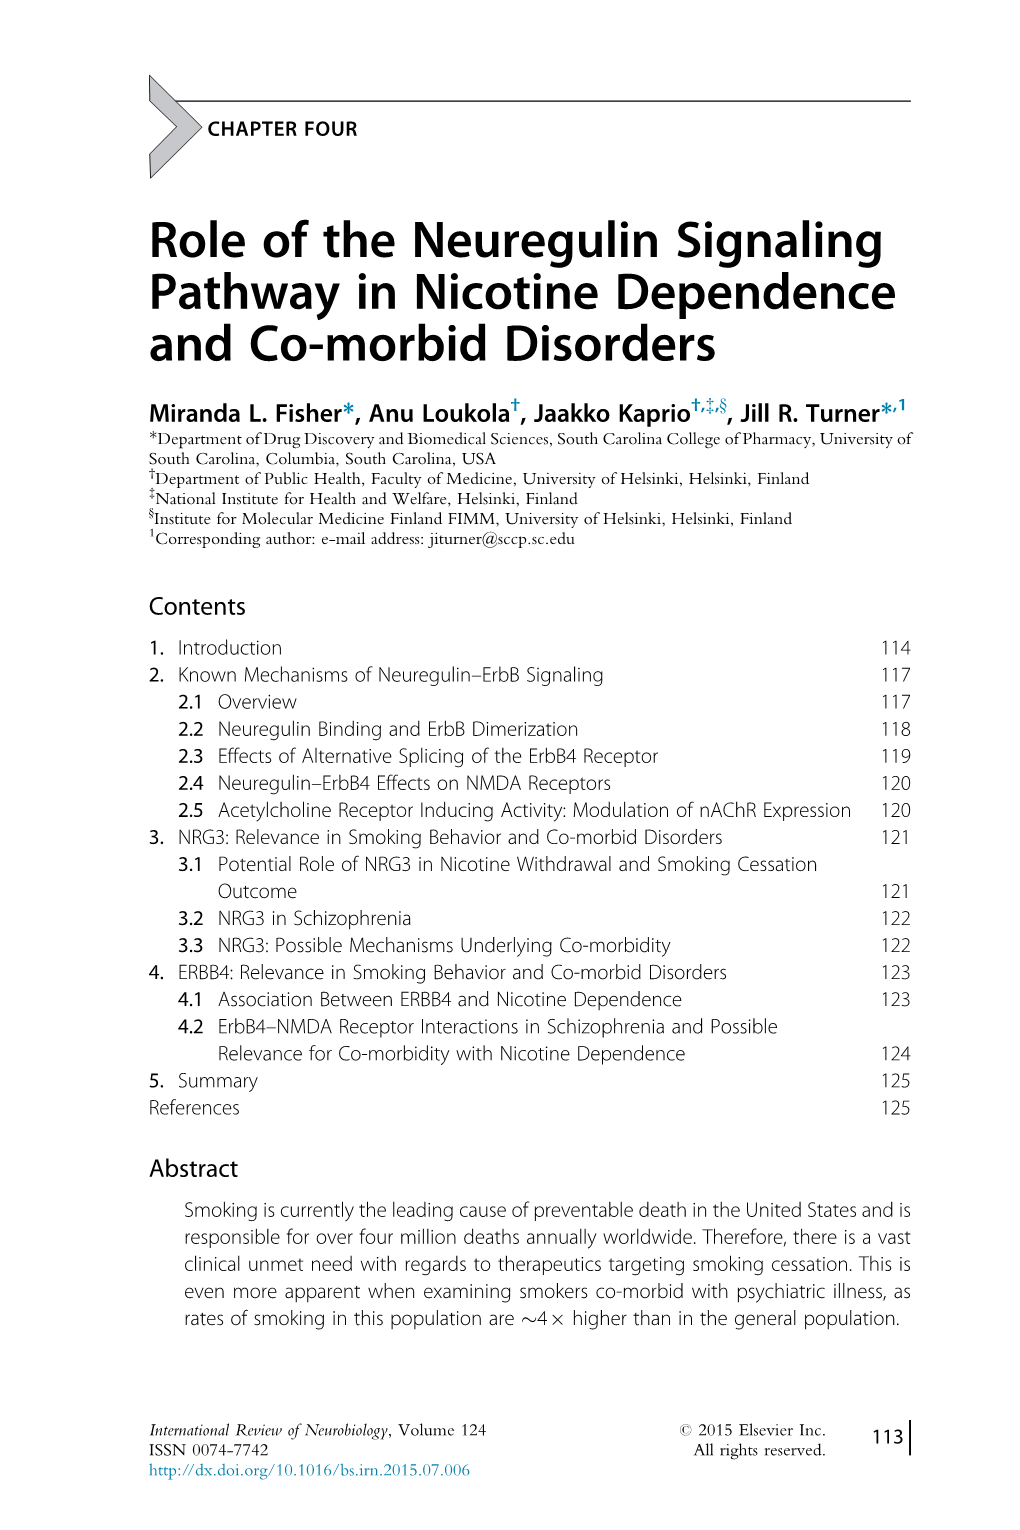 Role of the Neuregulin Signaling Pathway in Nicotine Dependence and Co-Morbid Disorders